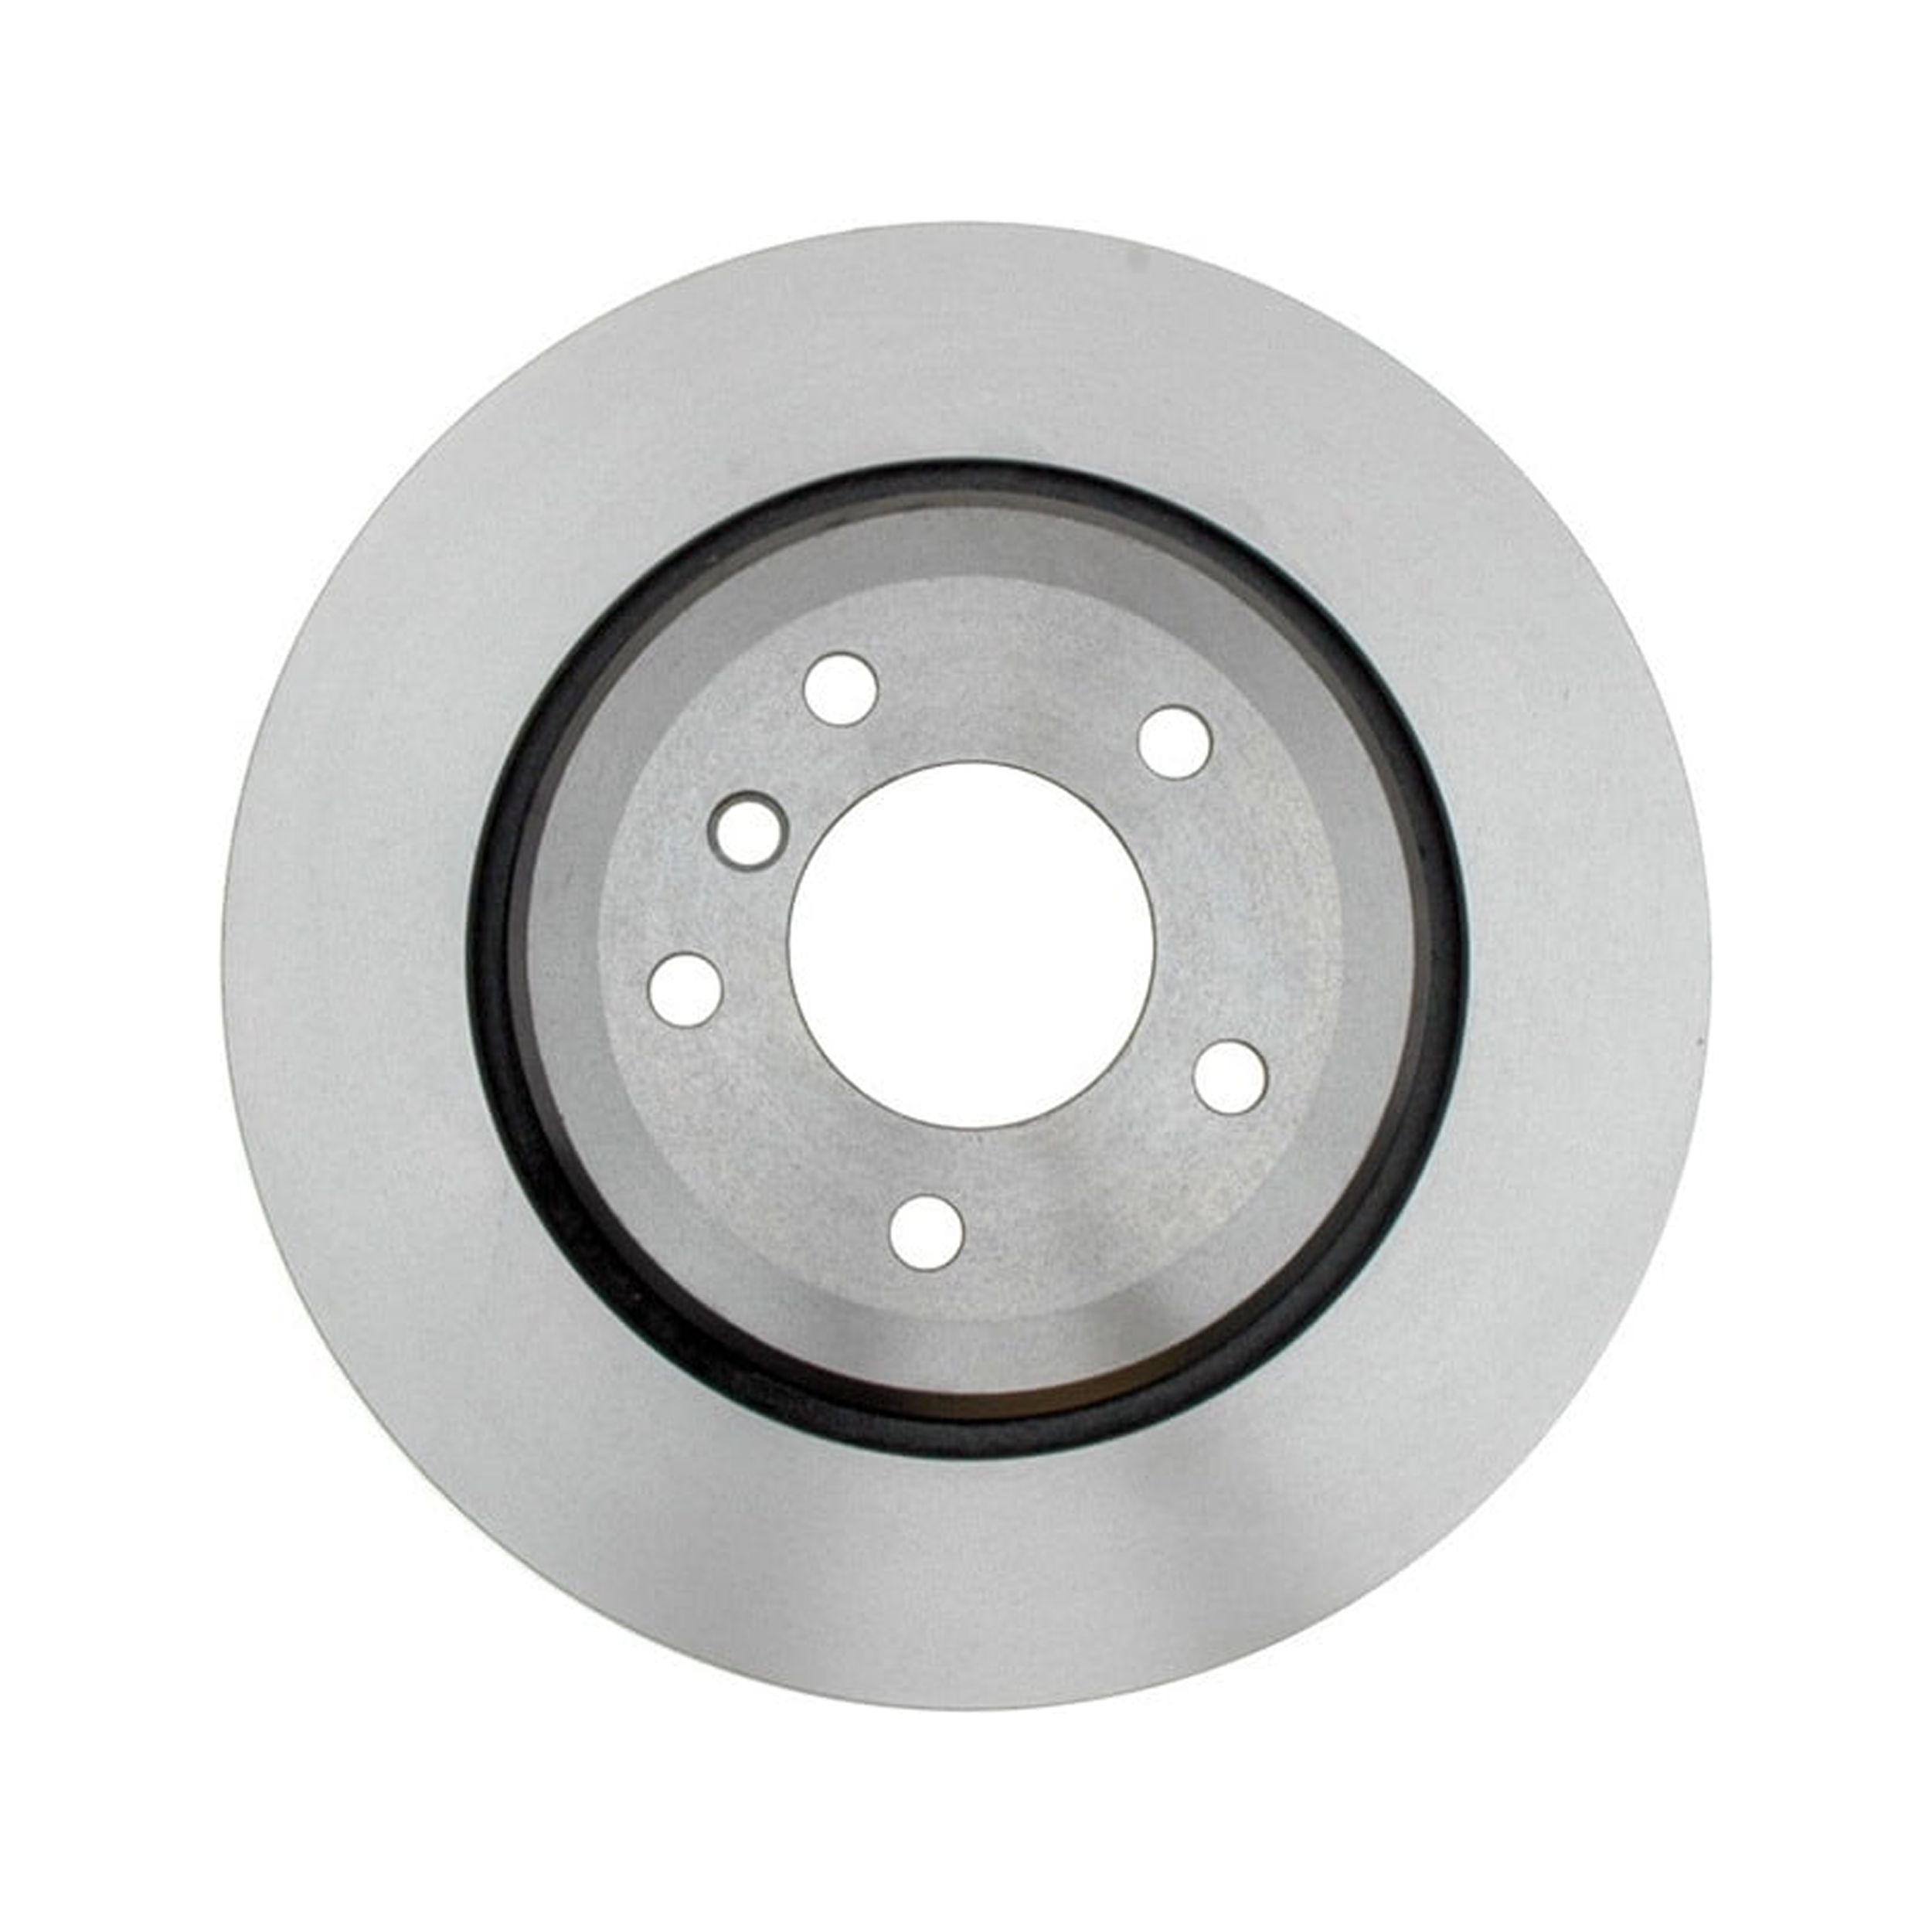 Raybestos Specialty Performance Rotors, 980126 Fits select: 2001-2006 BMW 330 - image 1 of 5